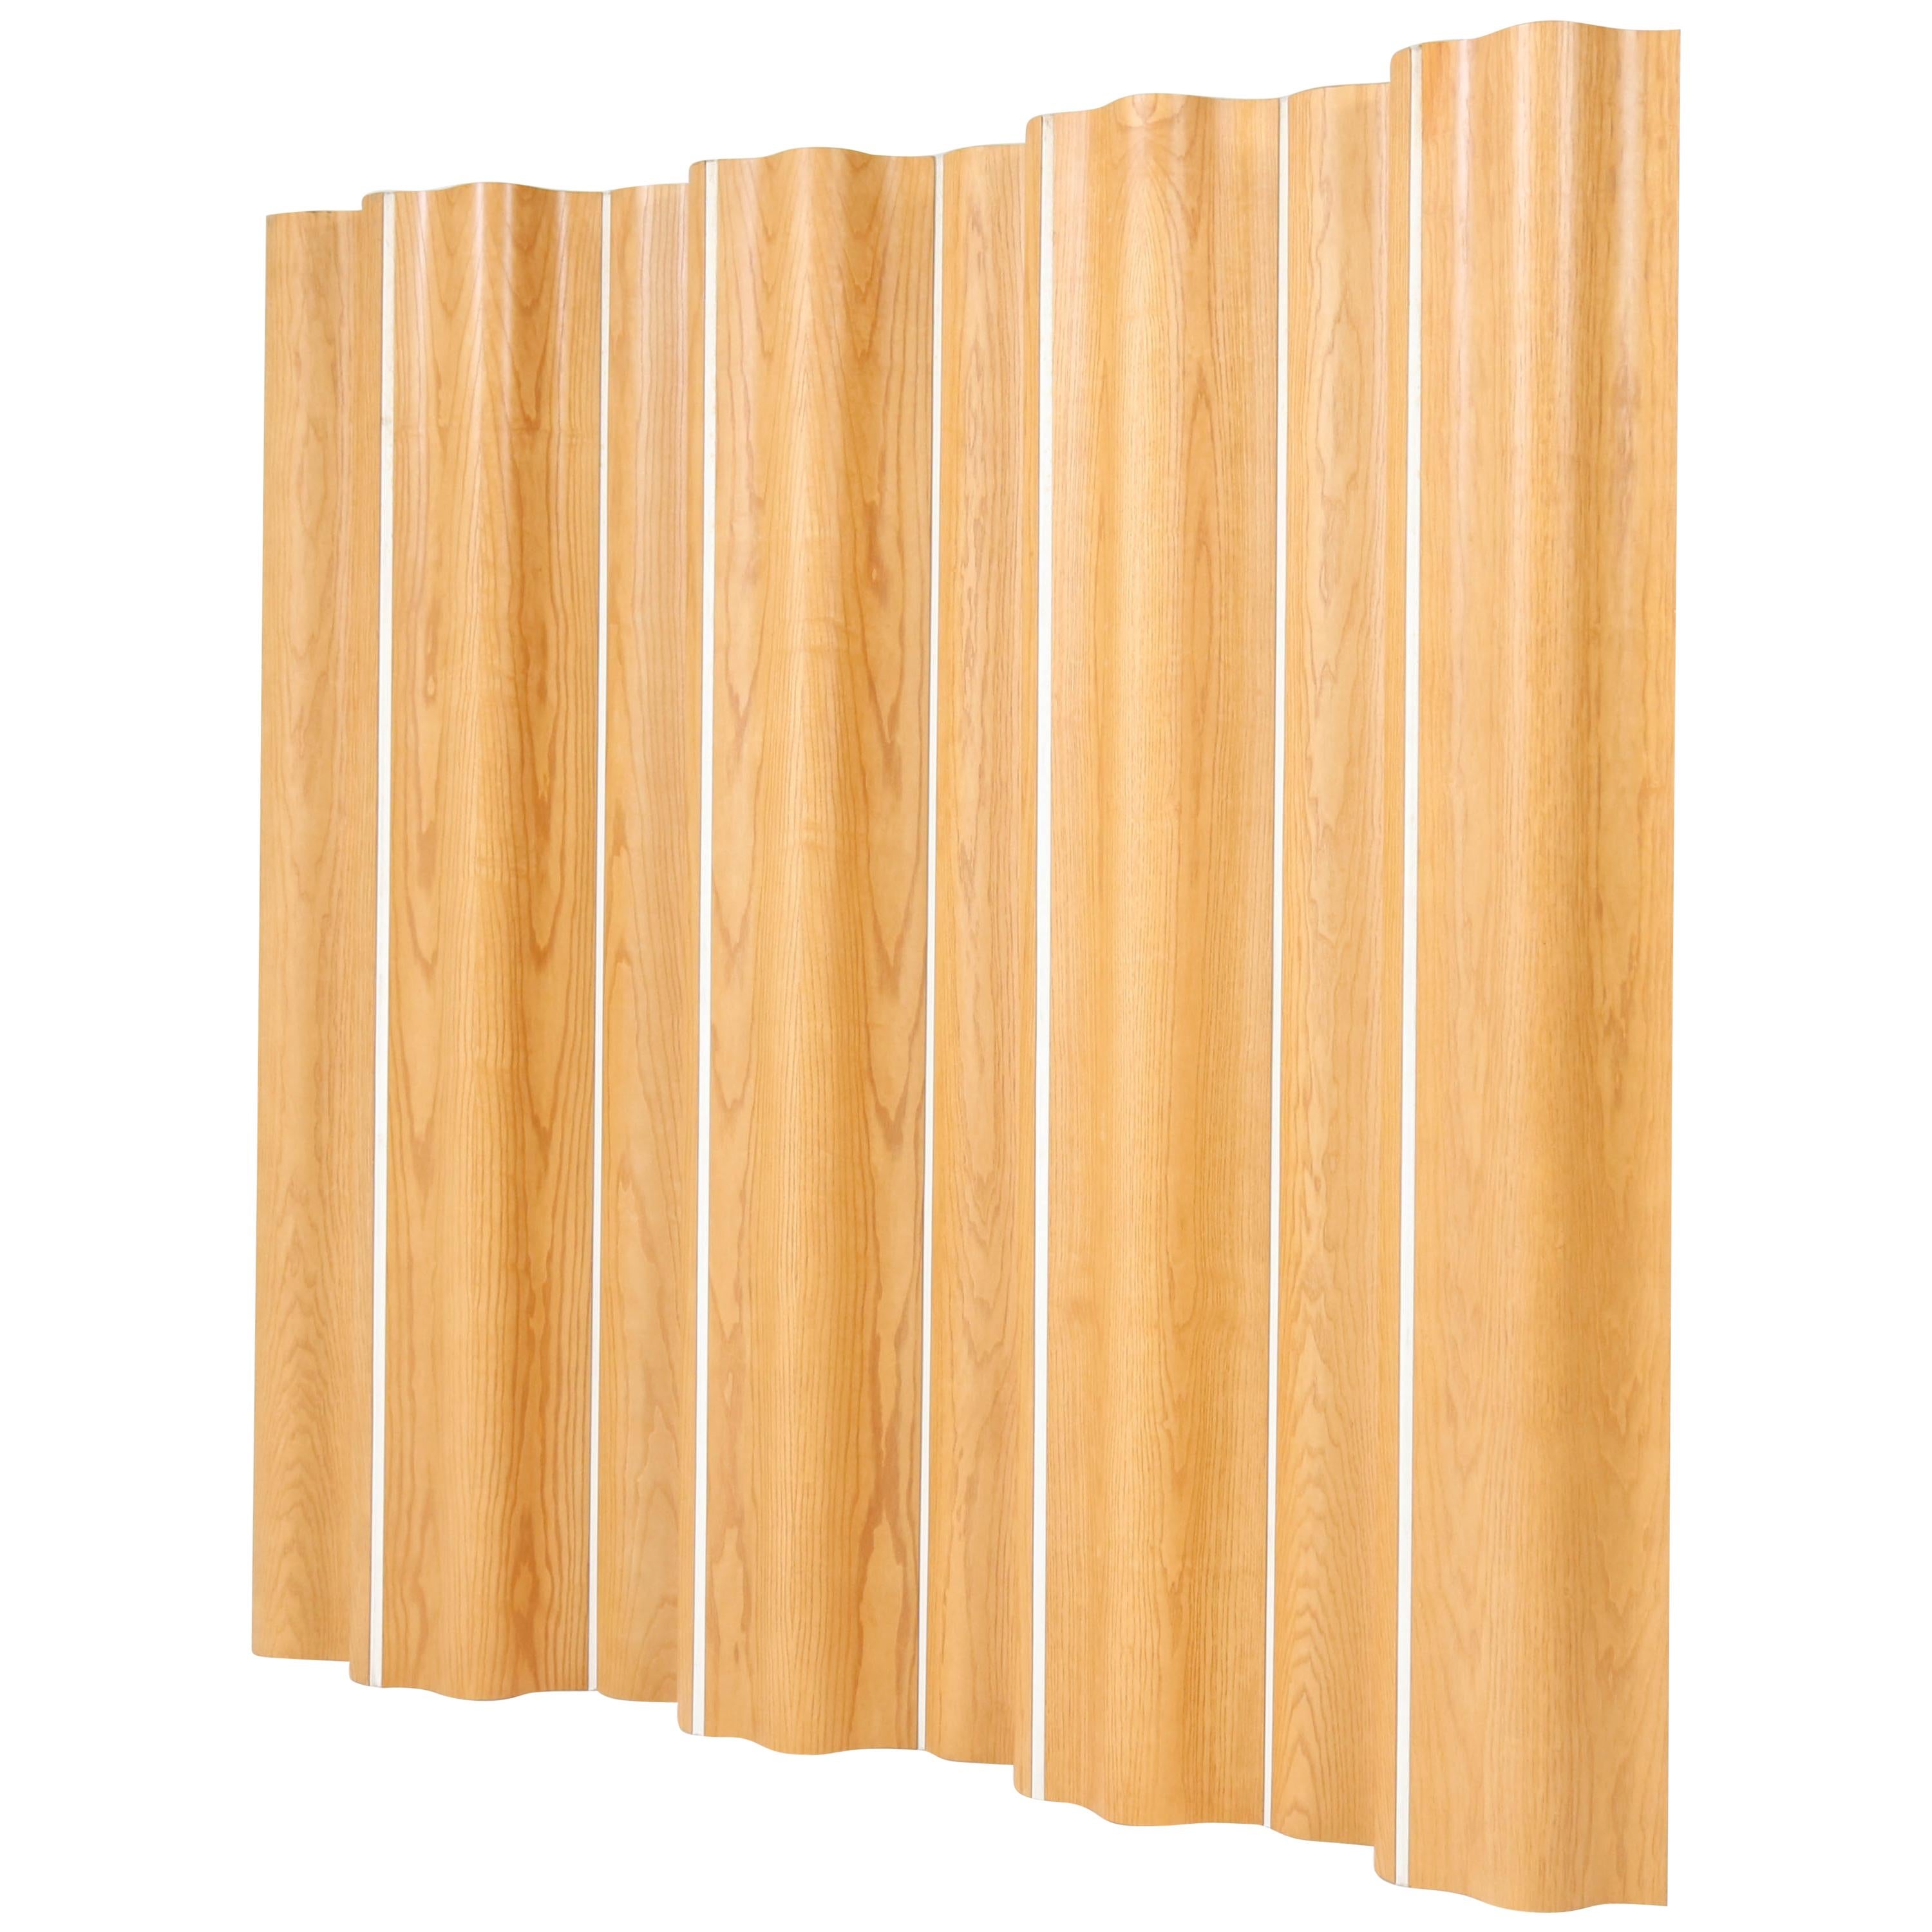 Large Ash Original Folding Screen or Divider by Charles and Ray Eames for Vitra